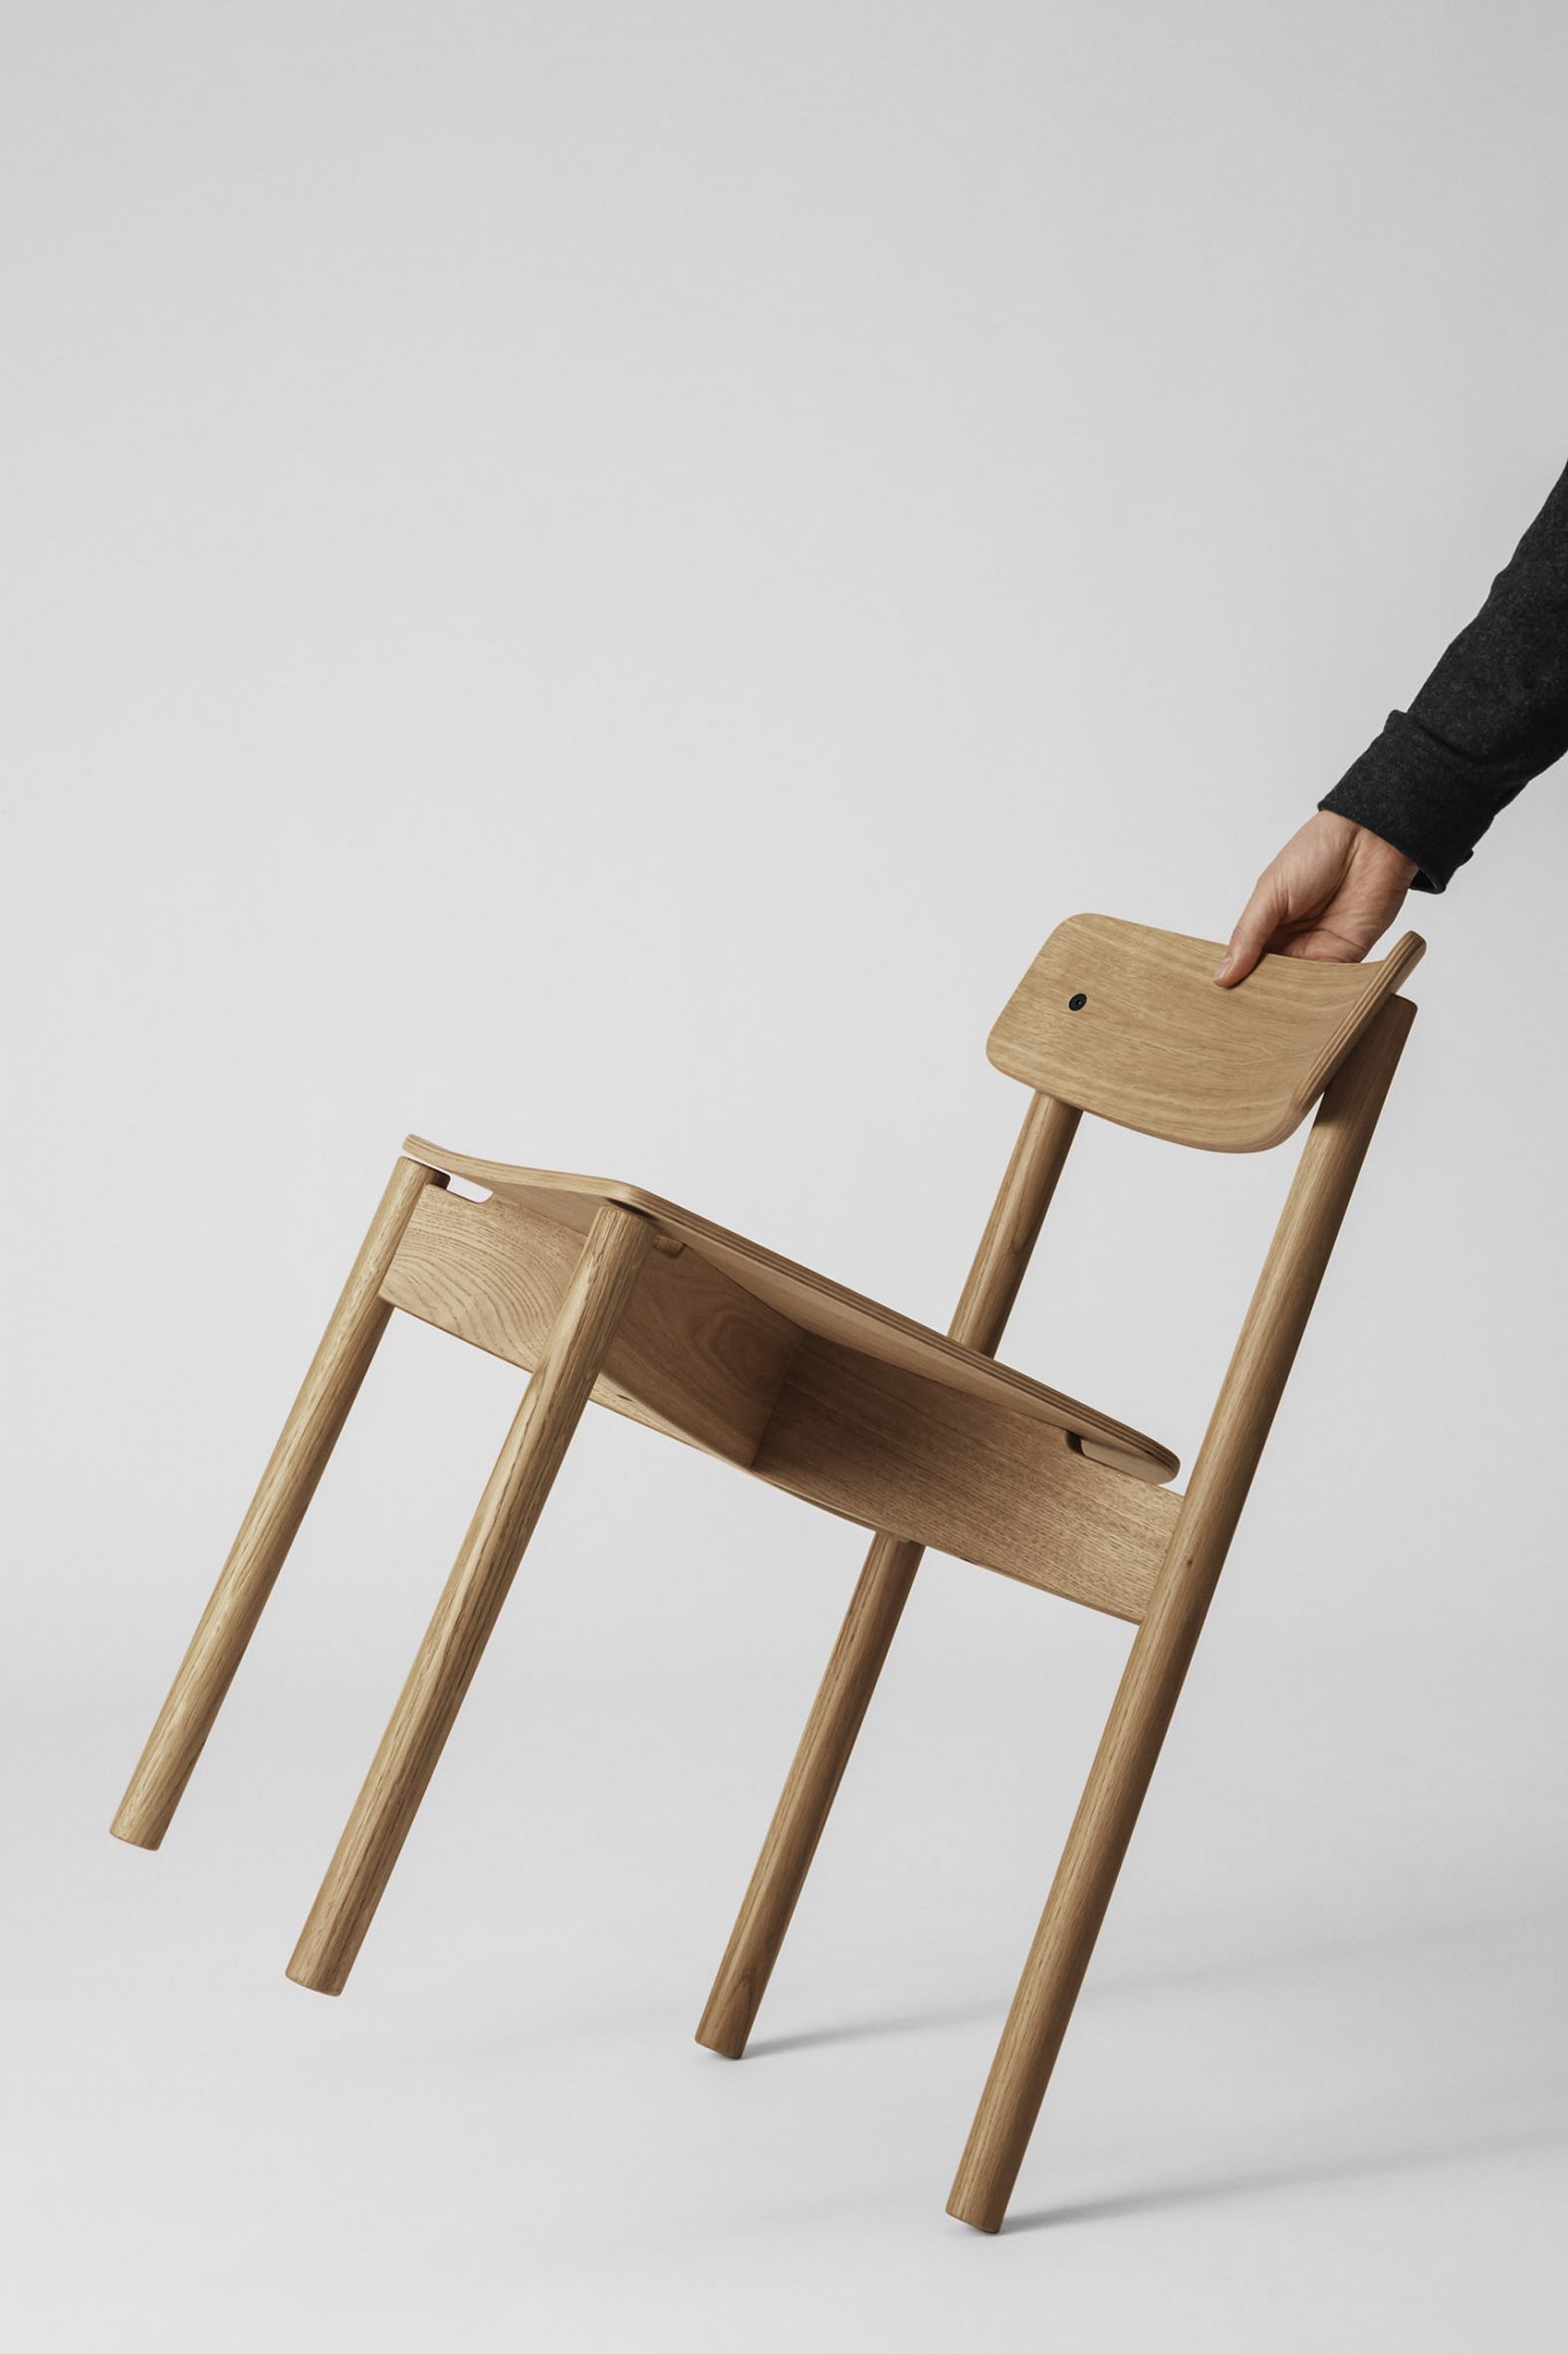 Takt's Cross Chair, which has a PEF score